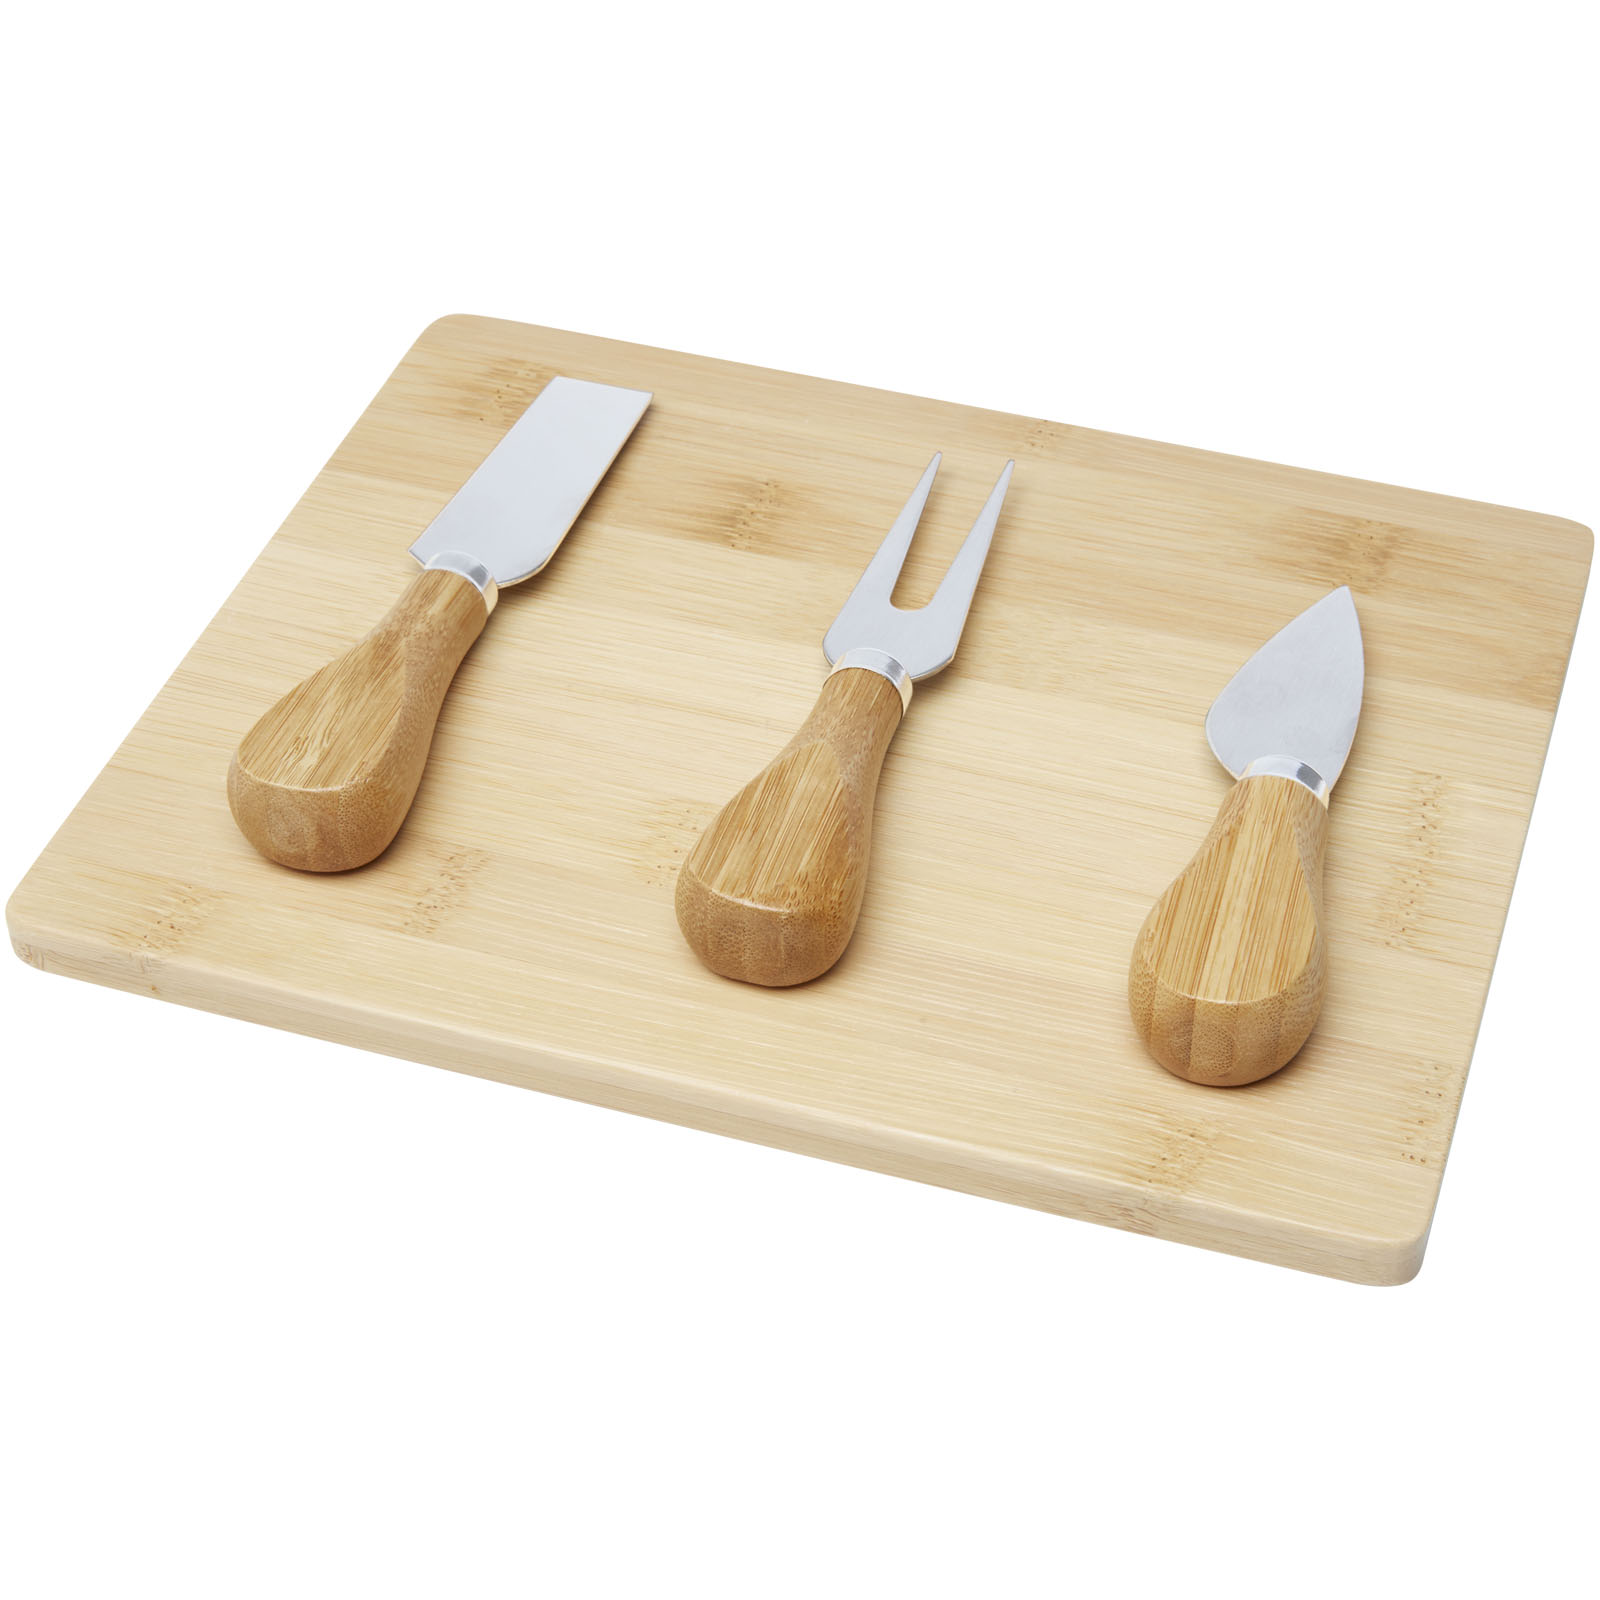 Home & Kitchen - Ement bamboo cheese board and tools